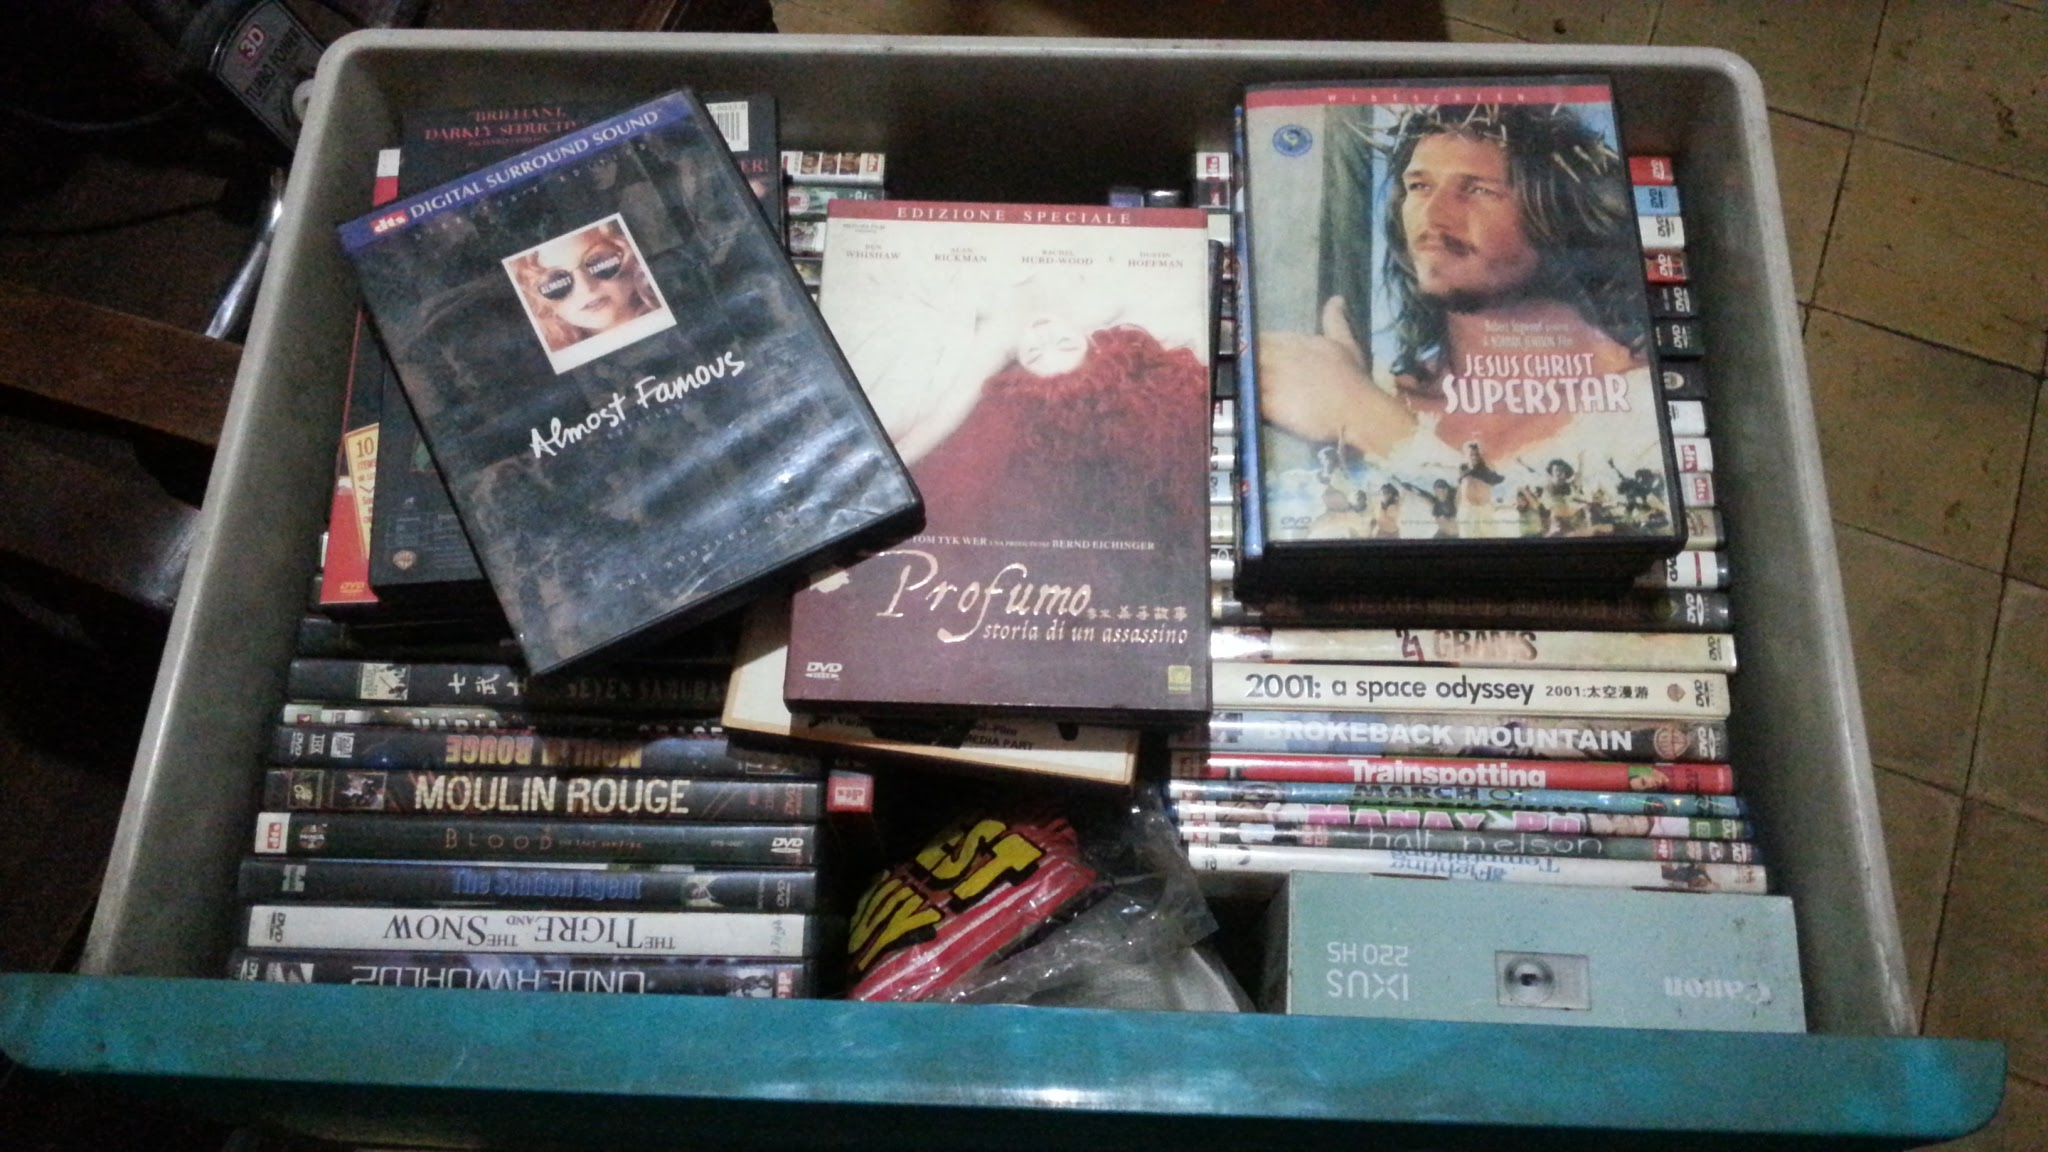 my pirated dvd collection in drawers. now all gone